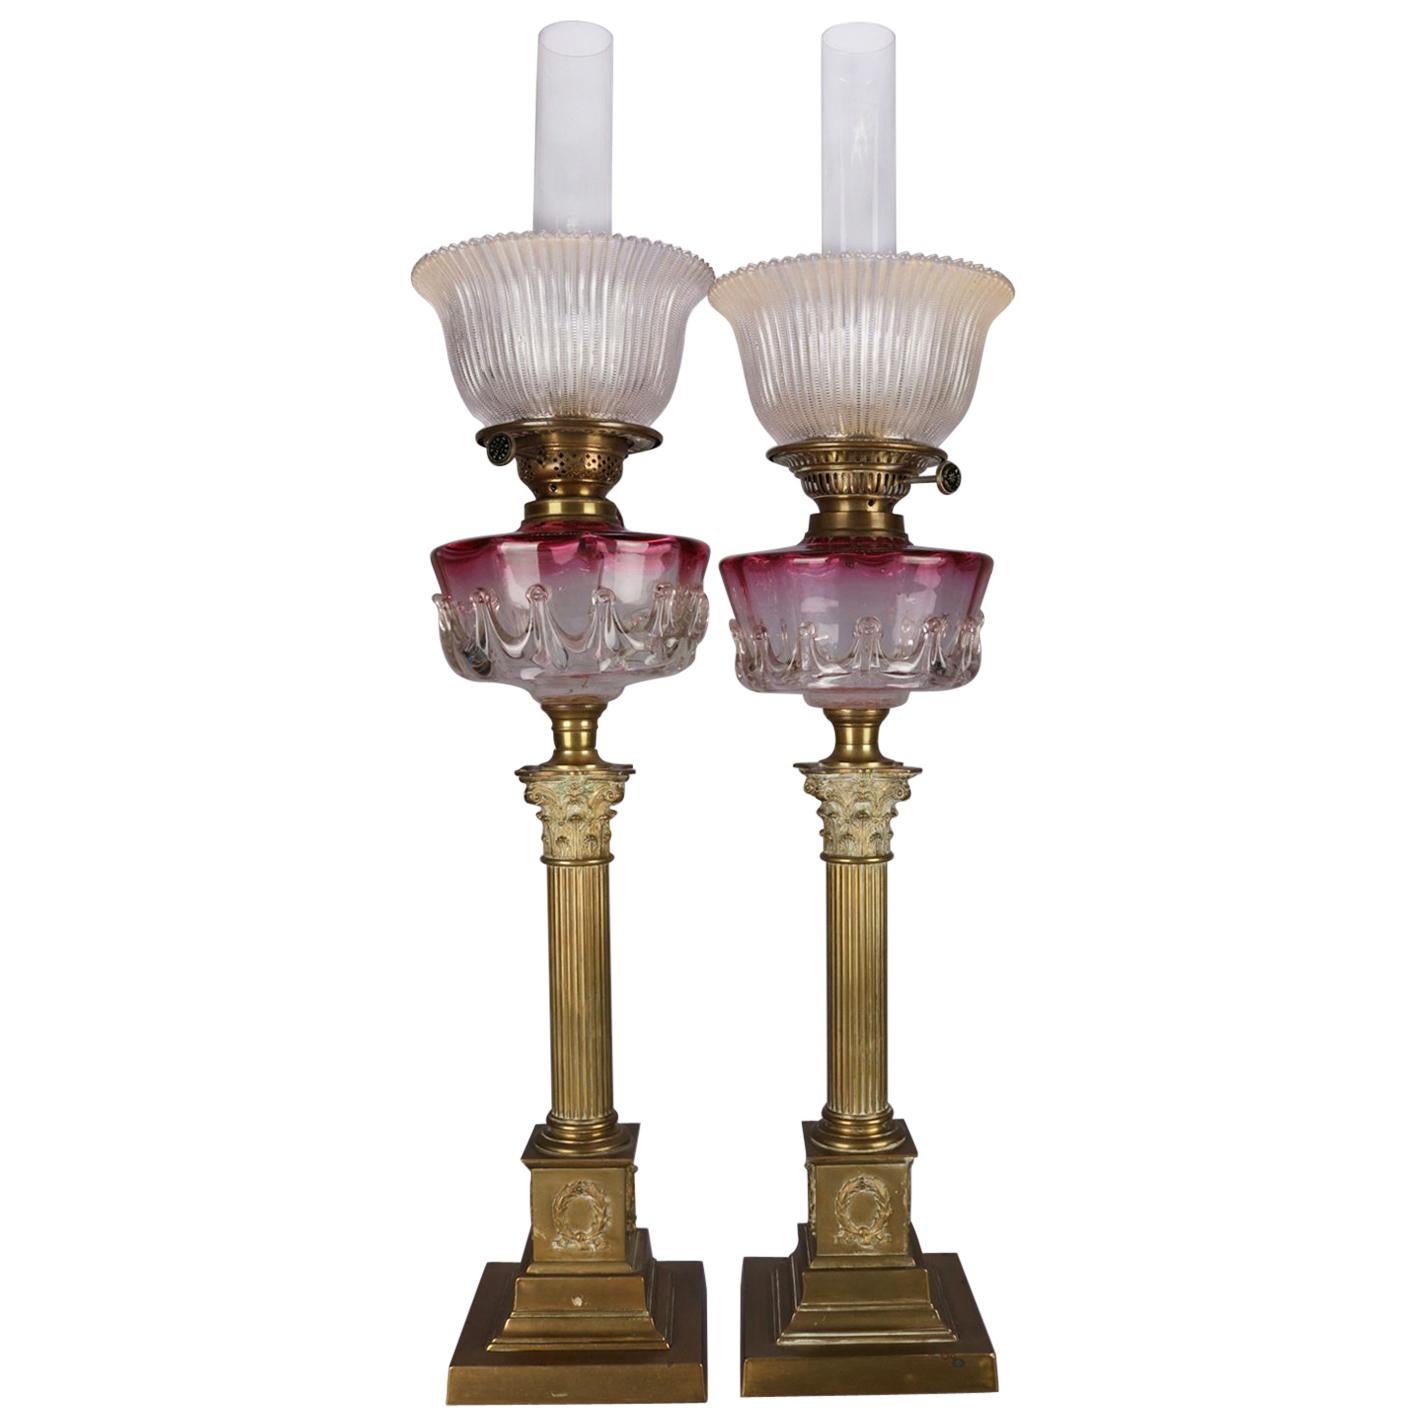 Antique Pair of Rubina Glass and Brass Electrified Oil Parlor Lamps, circa 1840